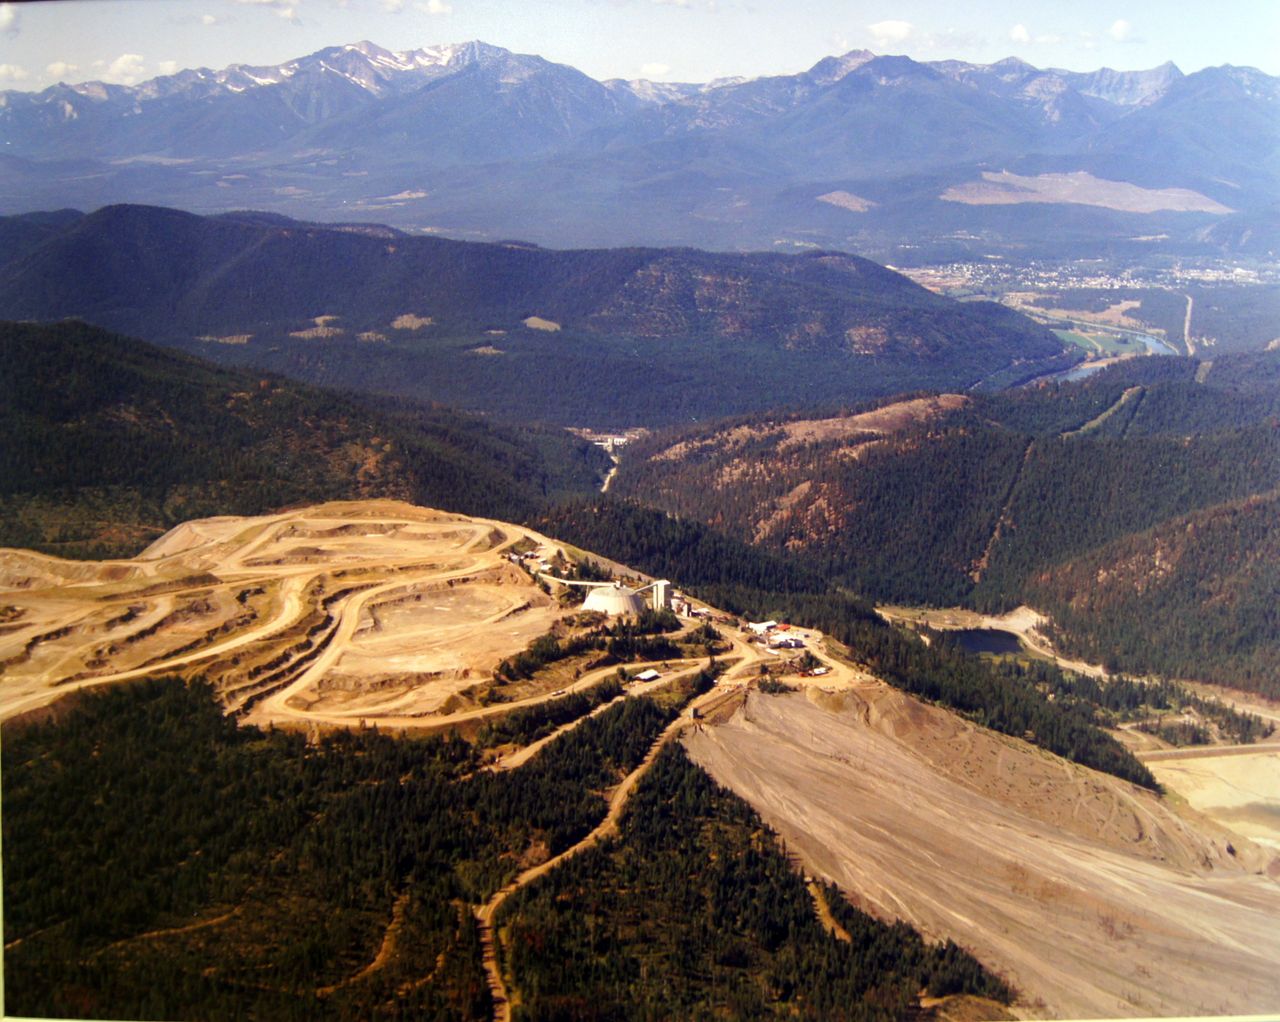 The vermiculite mine outside of Libby, Montana, operated for more than 70 years.